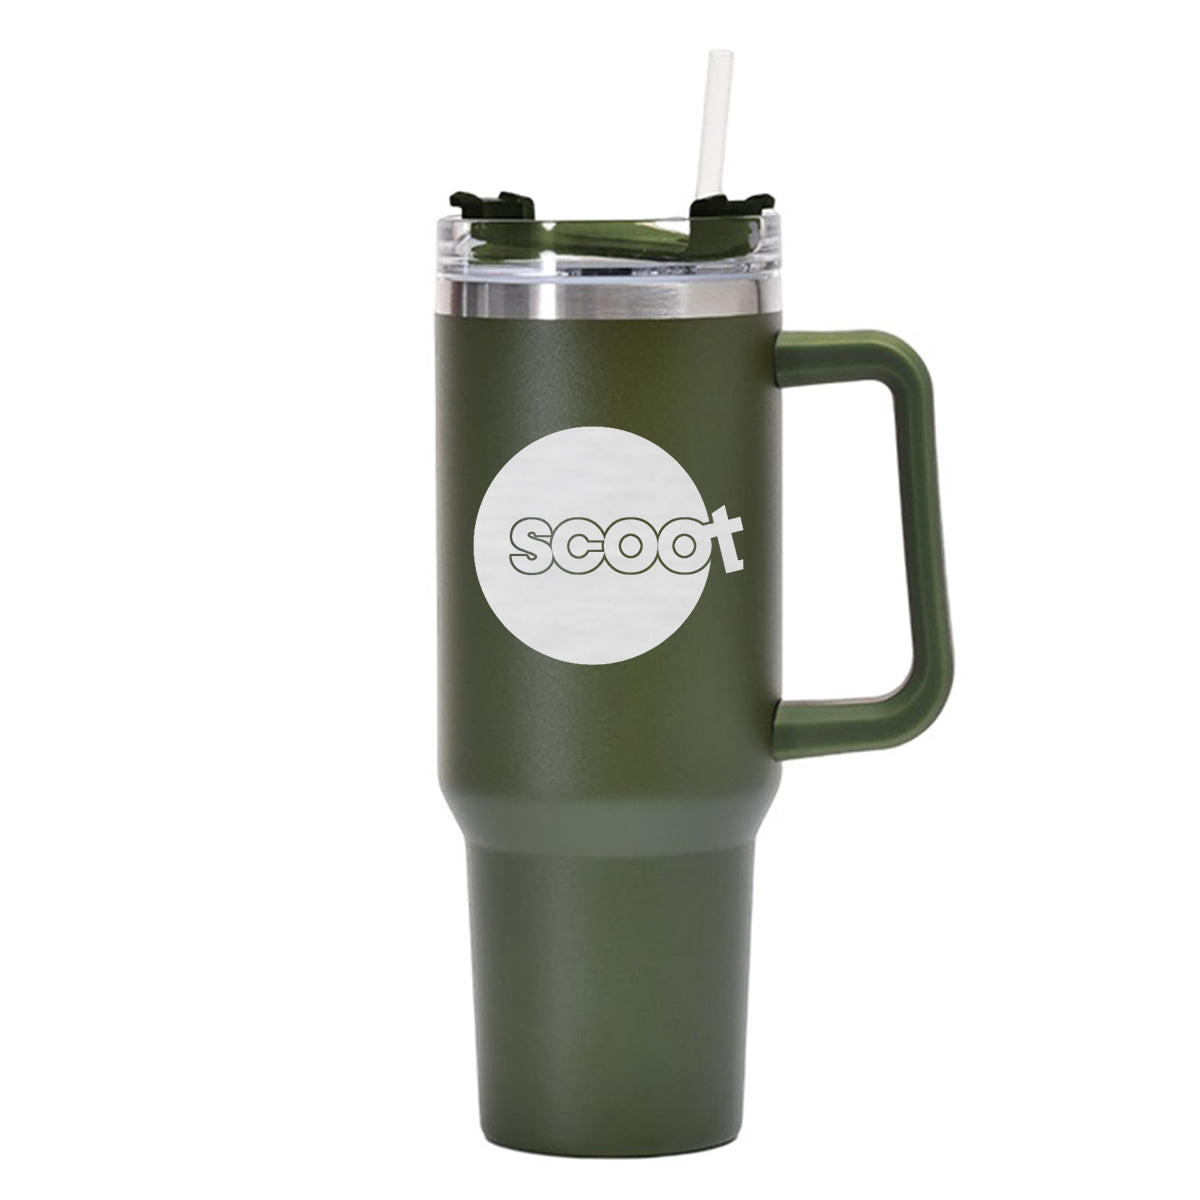 Scoot Airlines Designed 40oz Stainless Steel Car Mug With Holder